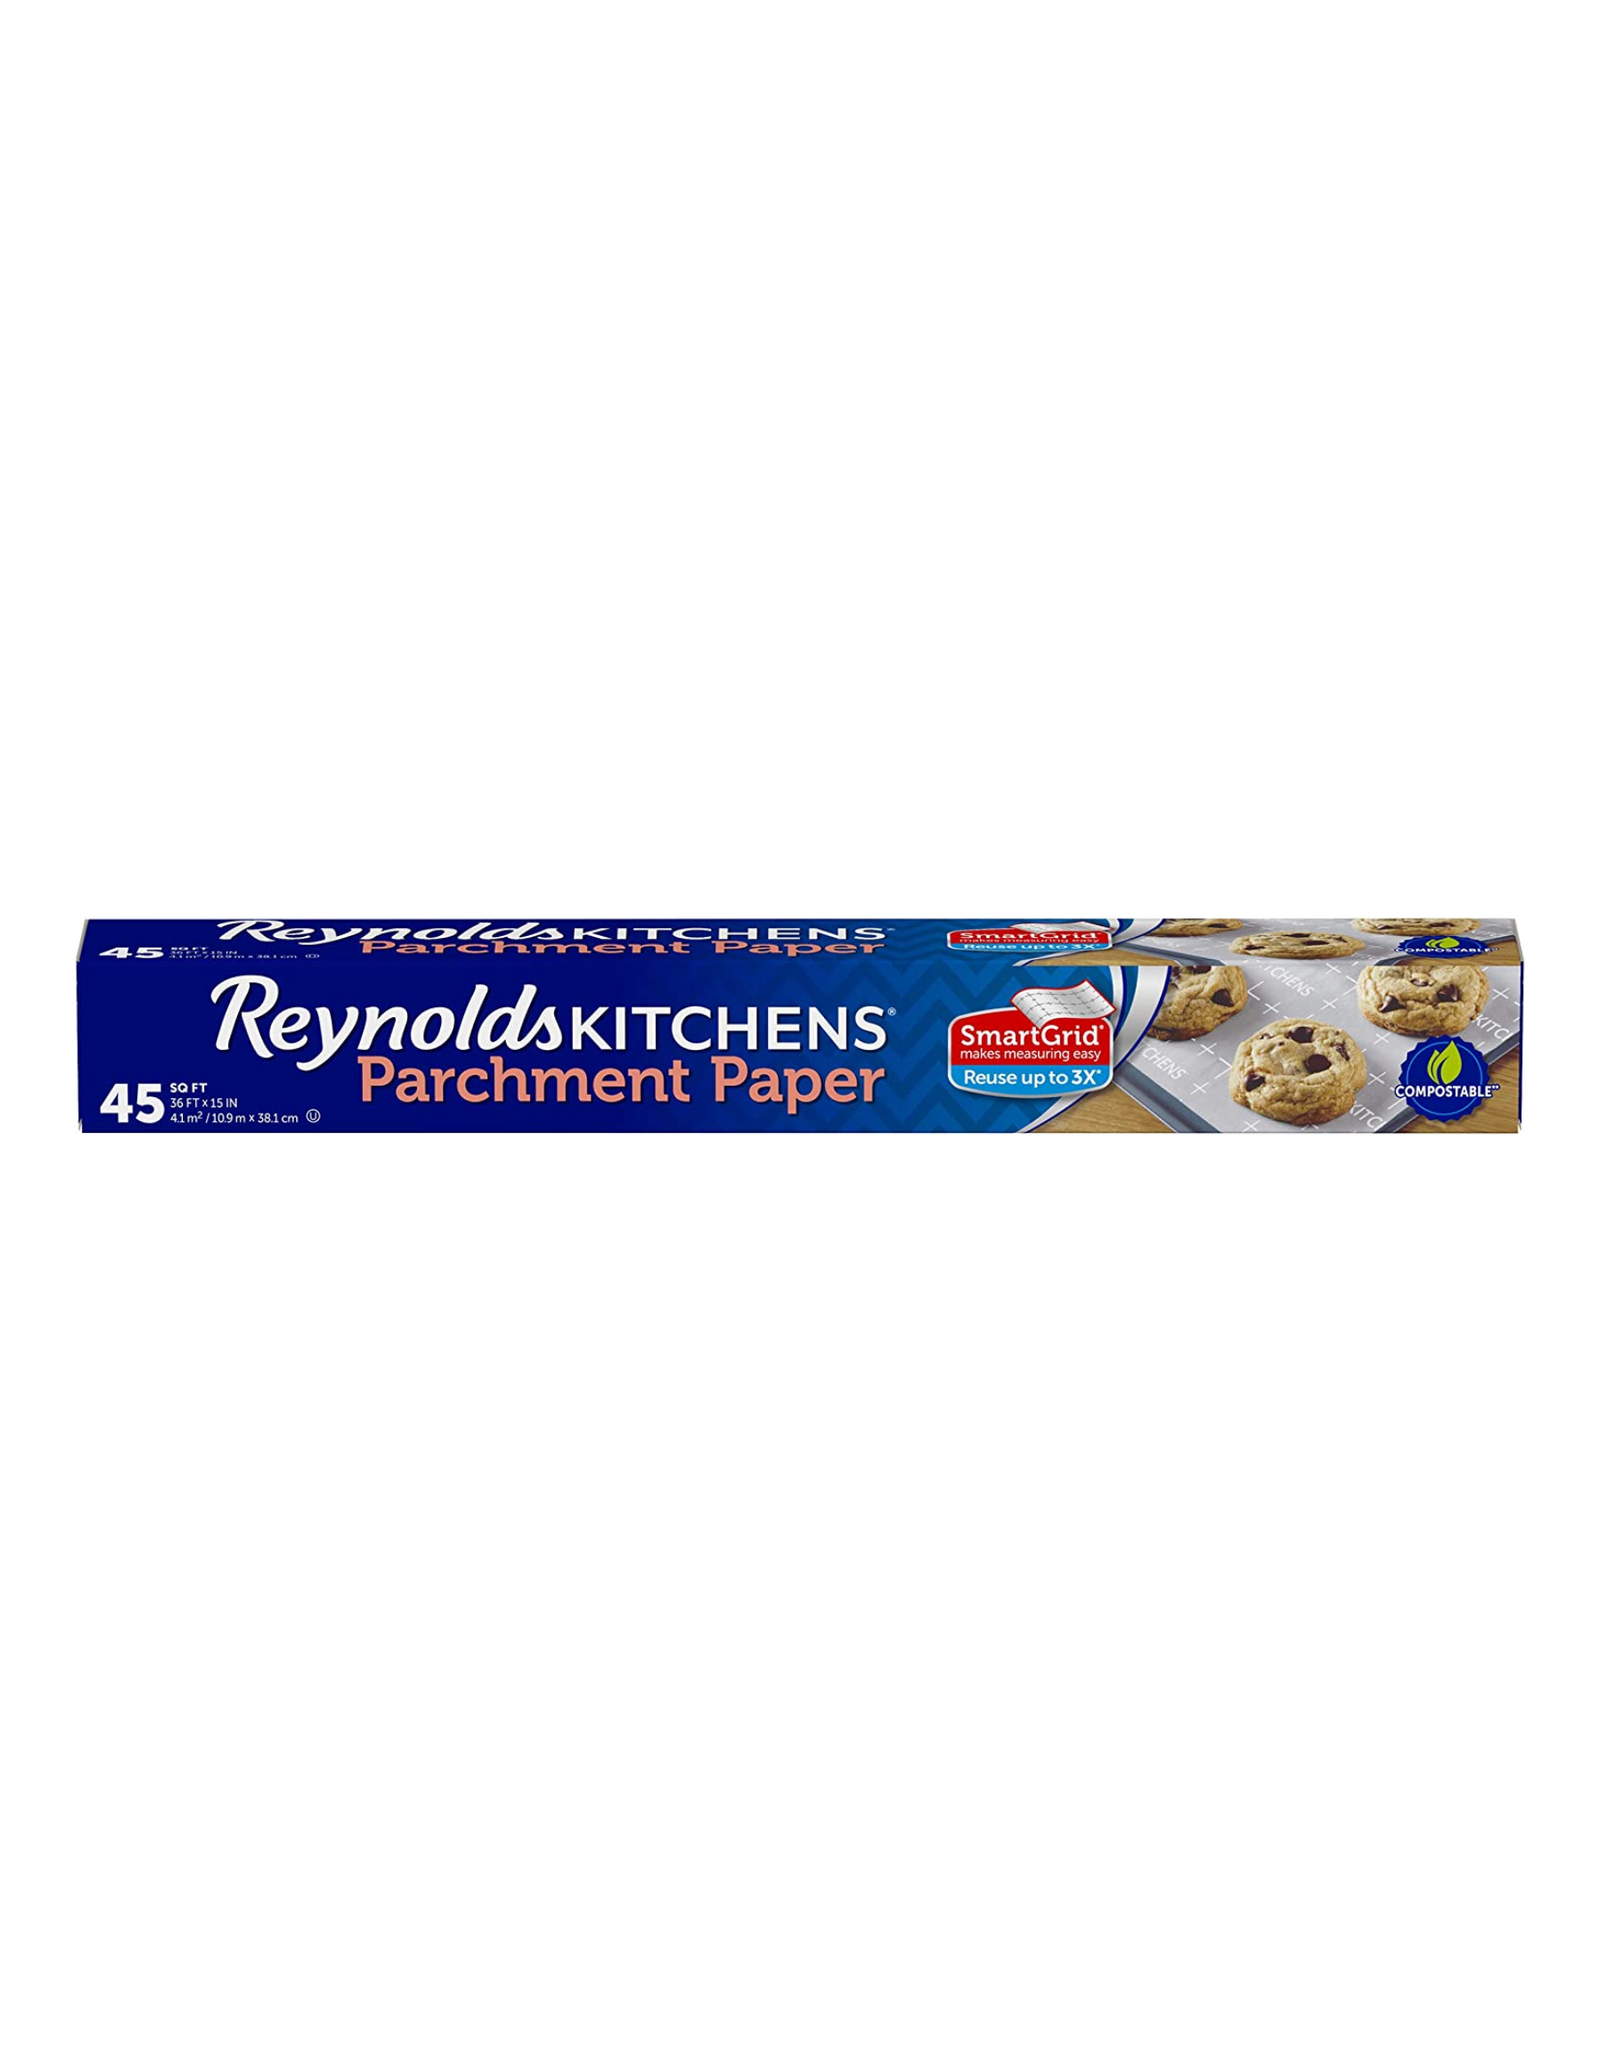 Reynolds Kitchens Parchment Paper Roll, SmartGrid Makes Measuring Easy, 45 Sq Ft.